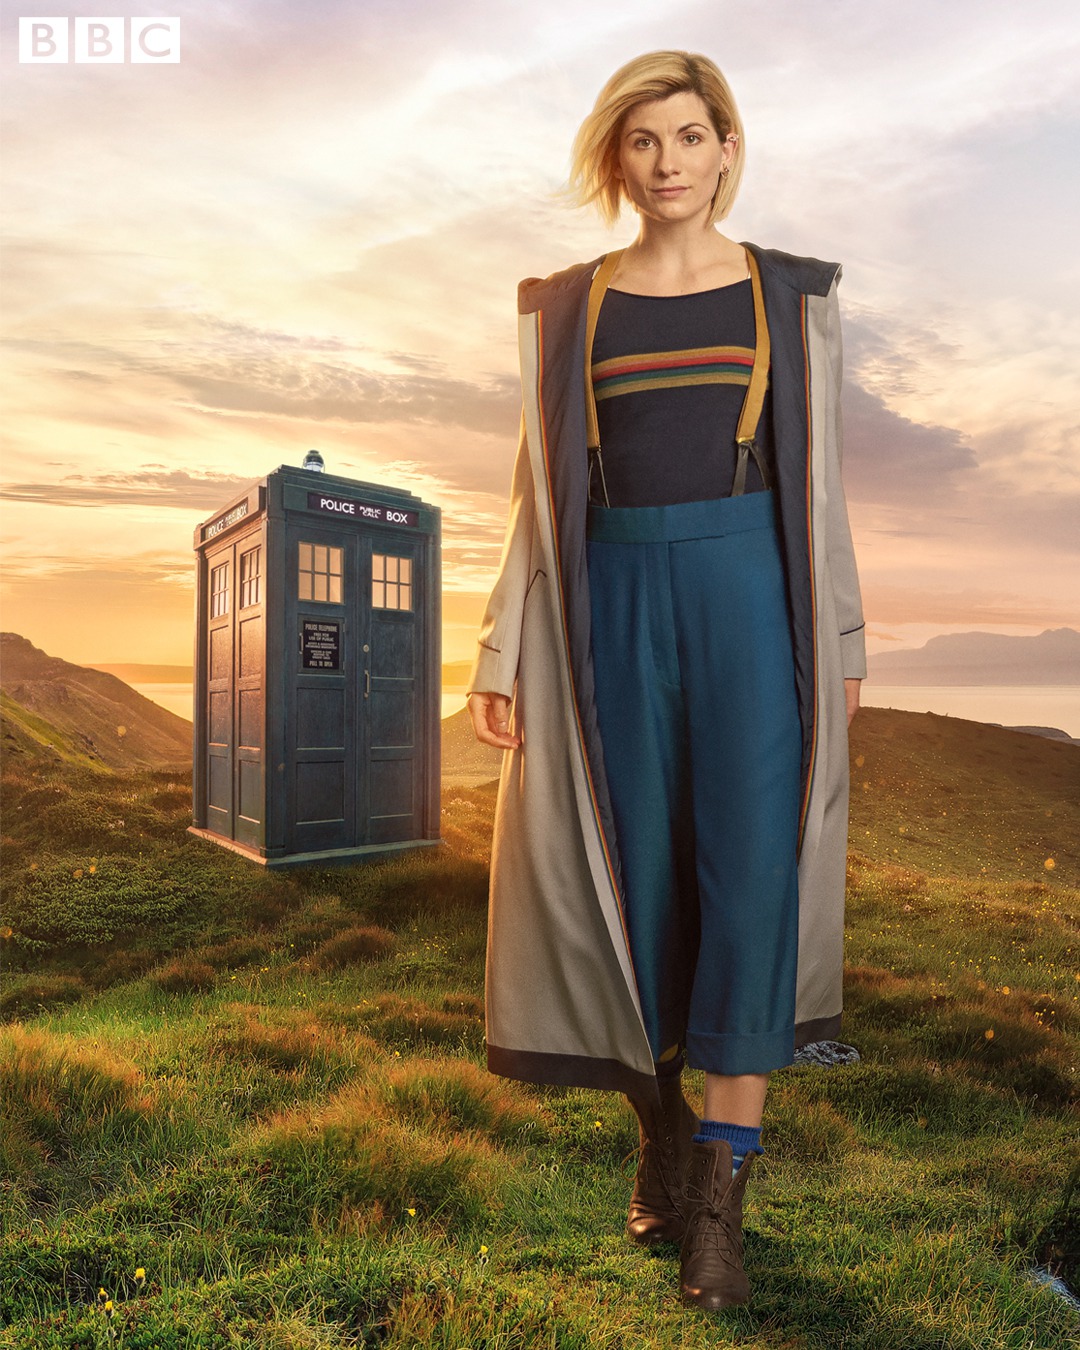 Extra Large TV Poster Image for Doctor Who (#17 of 30)